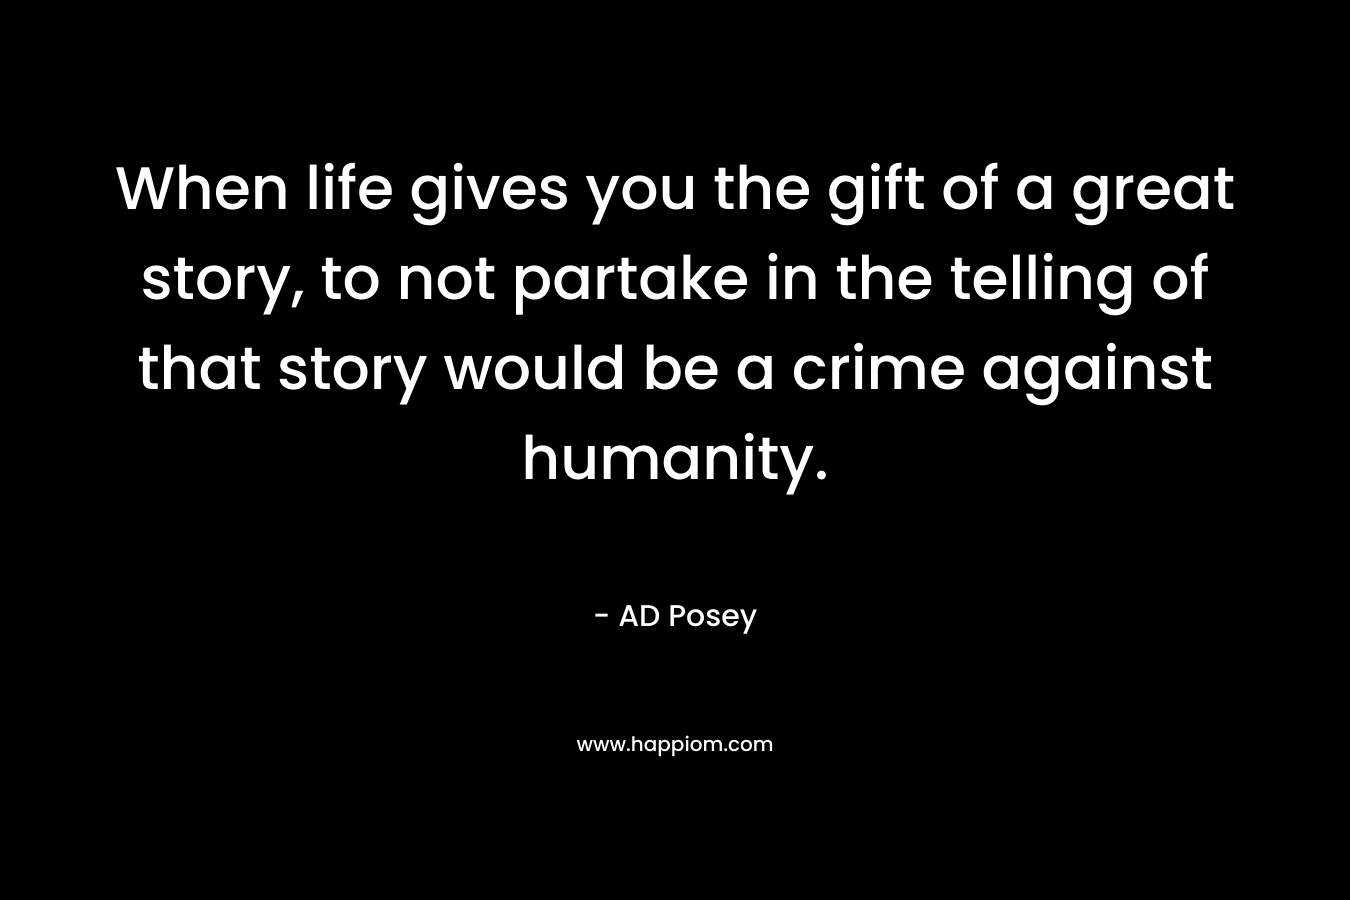 When life gives you the gift of a great story, to not partake in the telling of that story would be a crime against humanity.